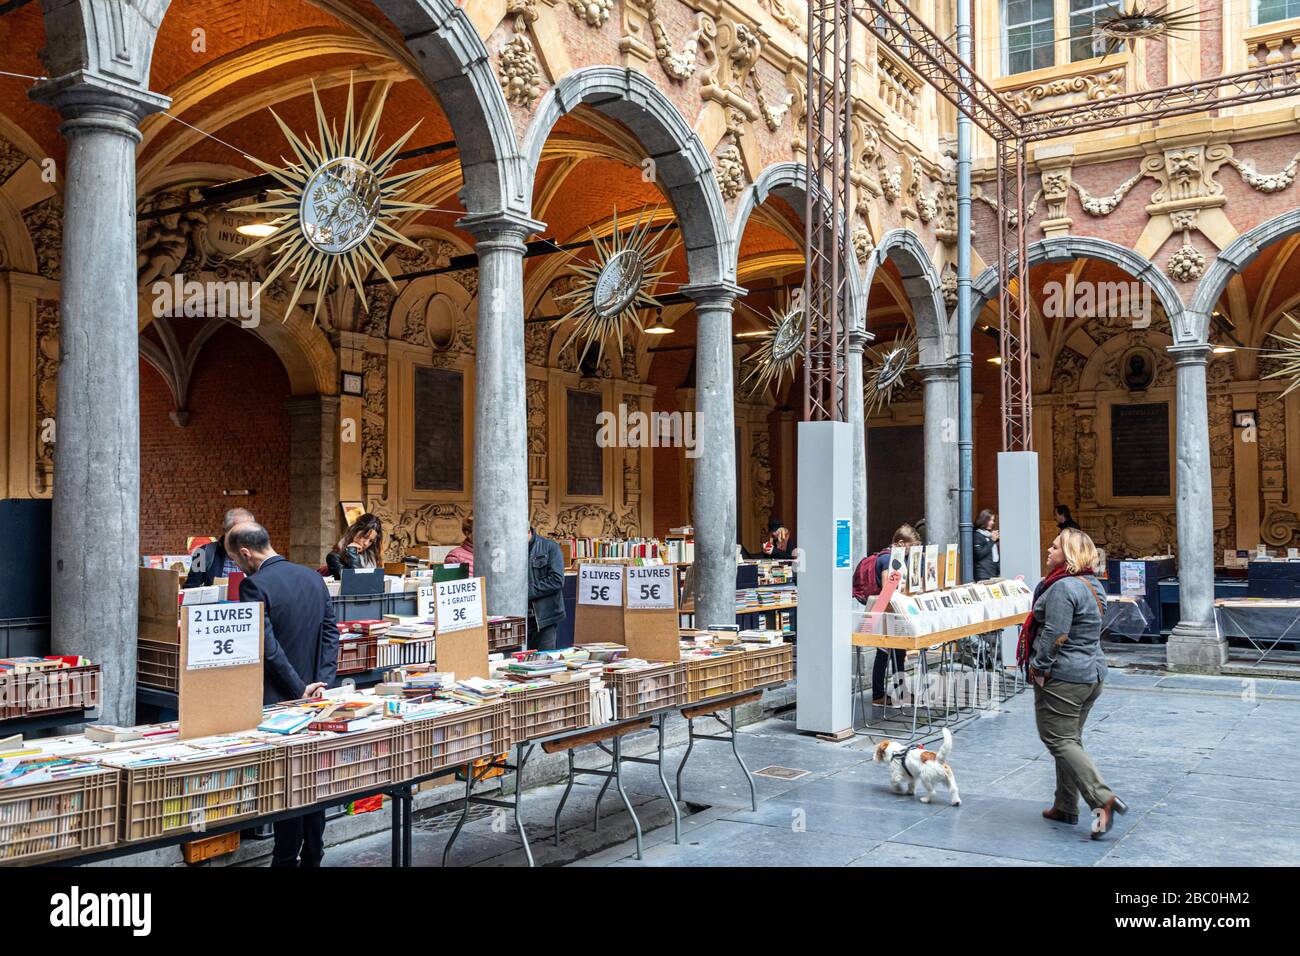 BOOK MARKET, INNER COURTYARD OF THE OLD STOCK EXCHANGE OF LILLE,  GRAND'PLACE, LILLE, NORD, FRANCE Stock Photo - Alamy